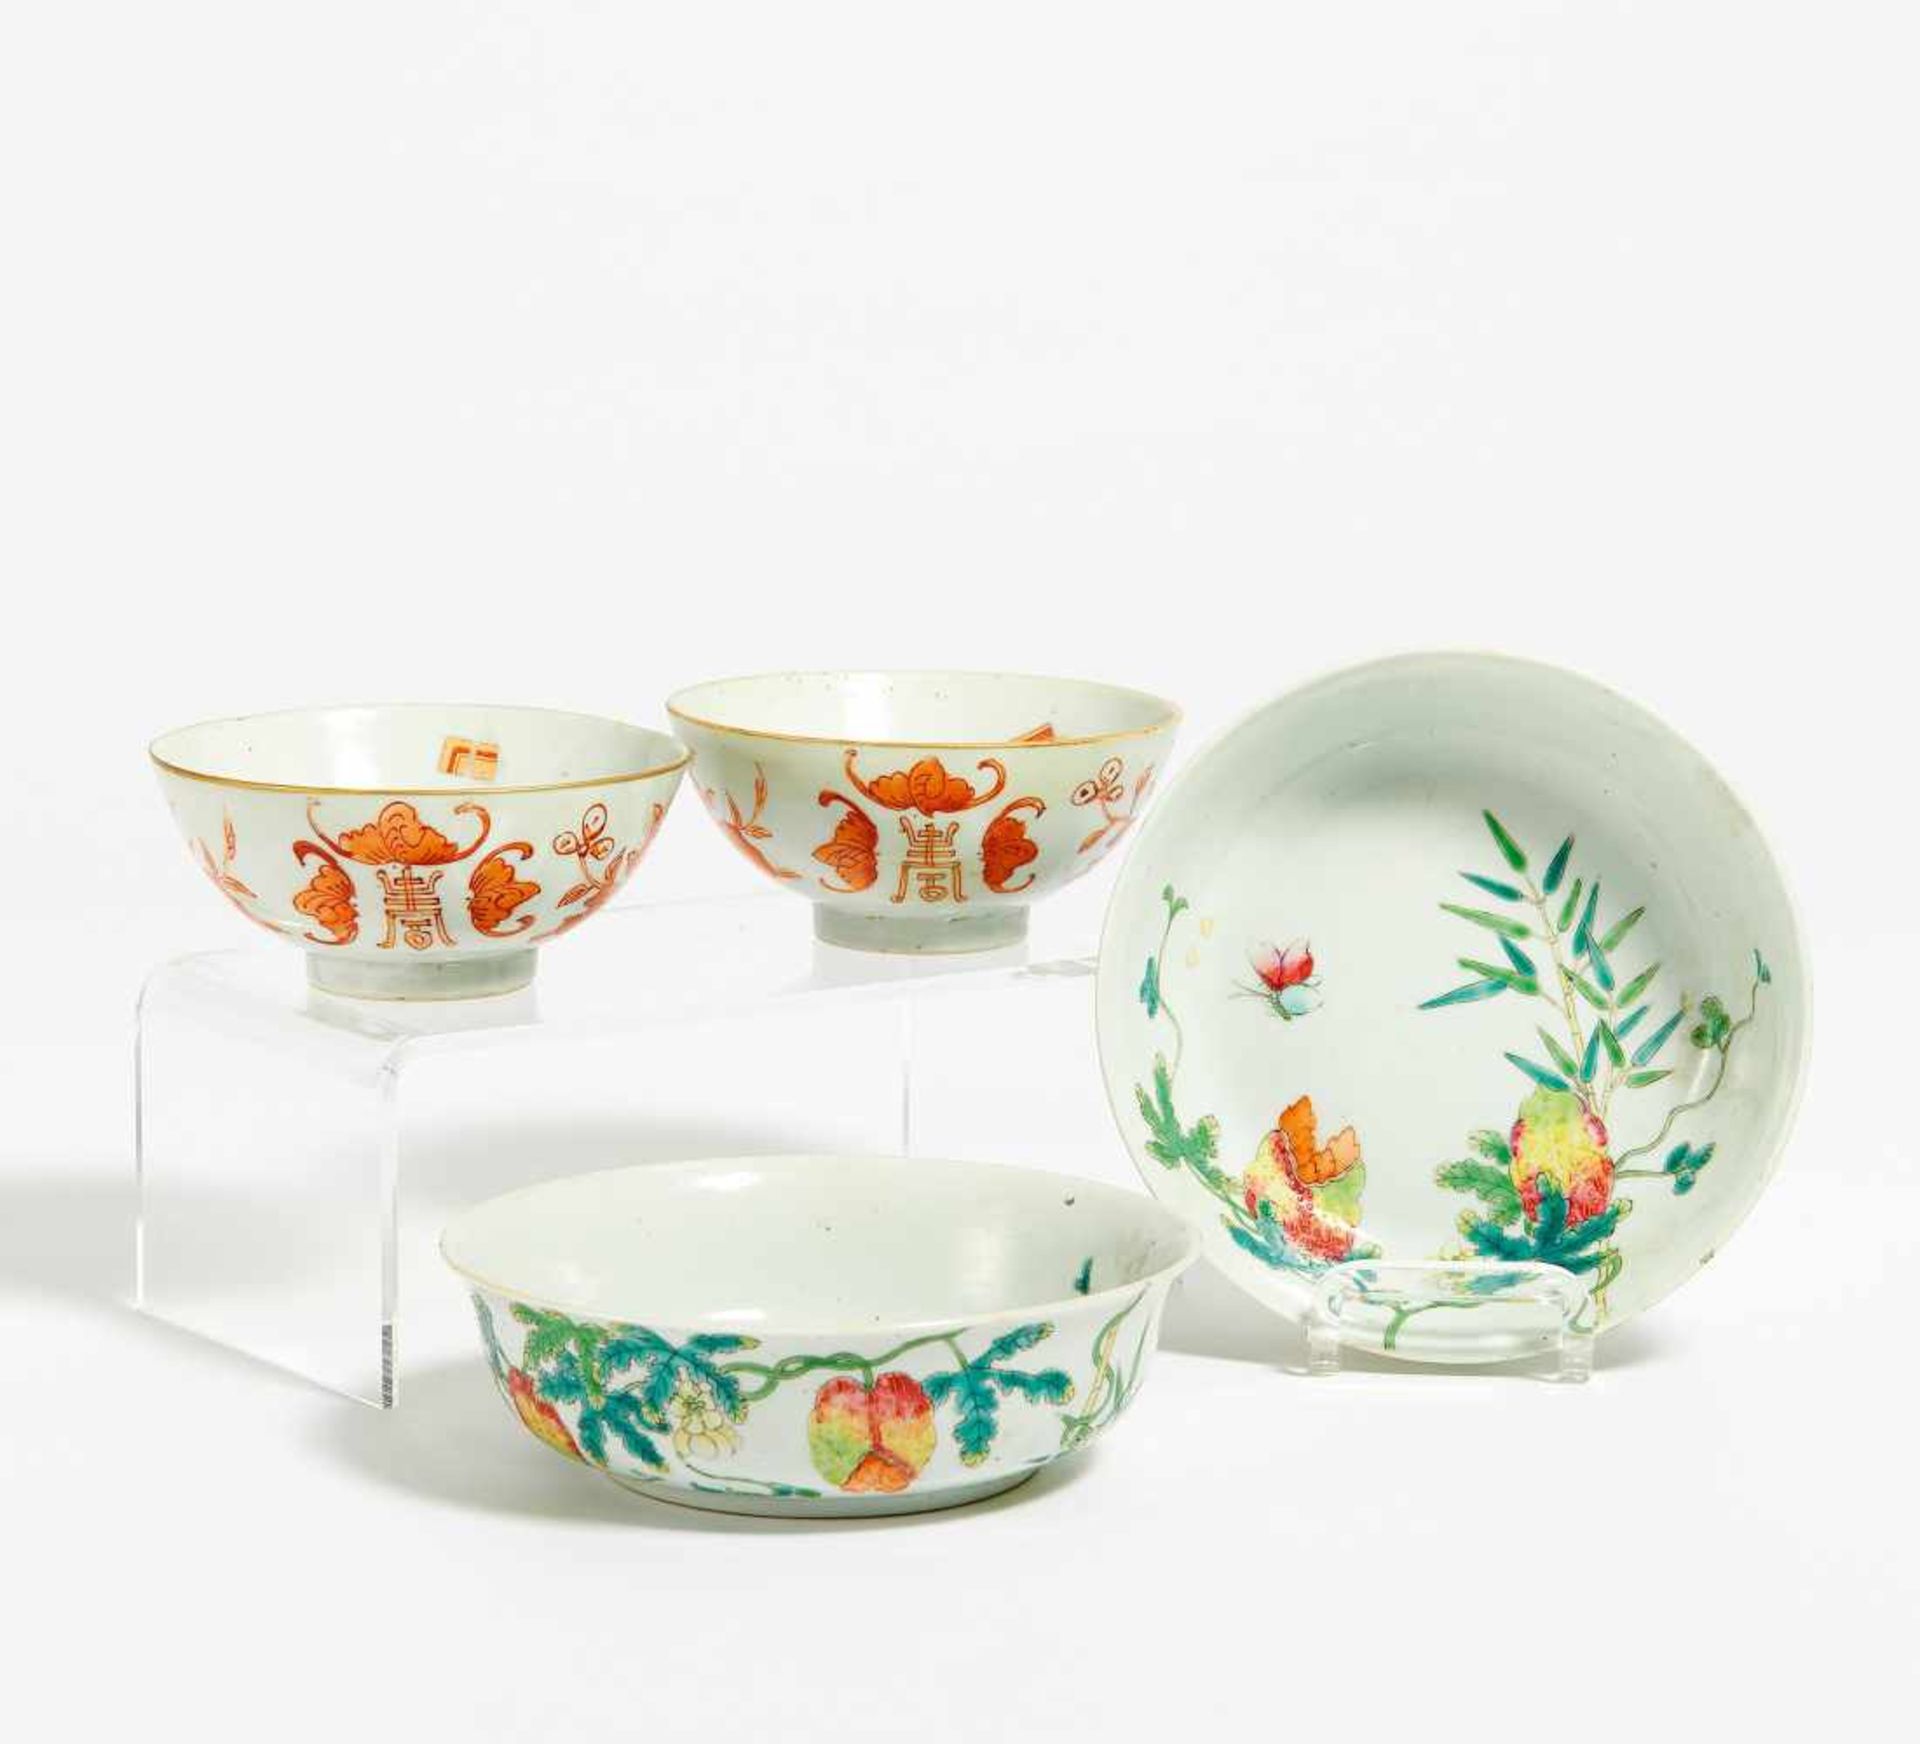 TWO PAIRS OF SMALL BOWLS WITH FRUITS. China. 19th/20th c. Porcelain, painted with enamel in iron